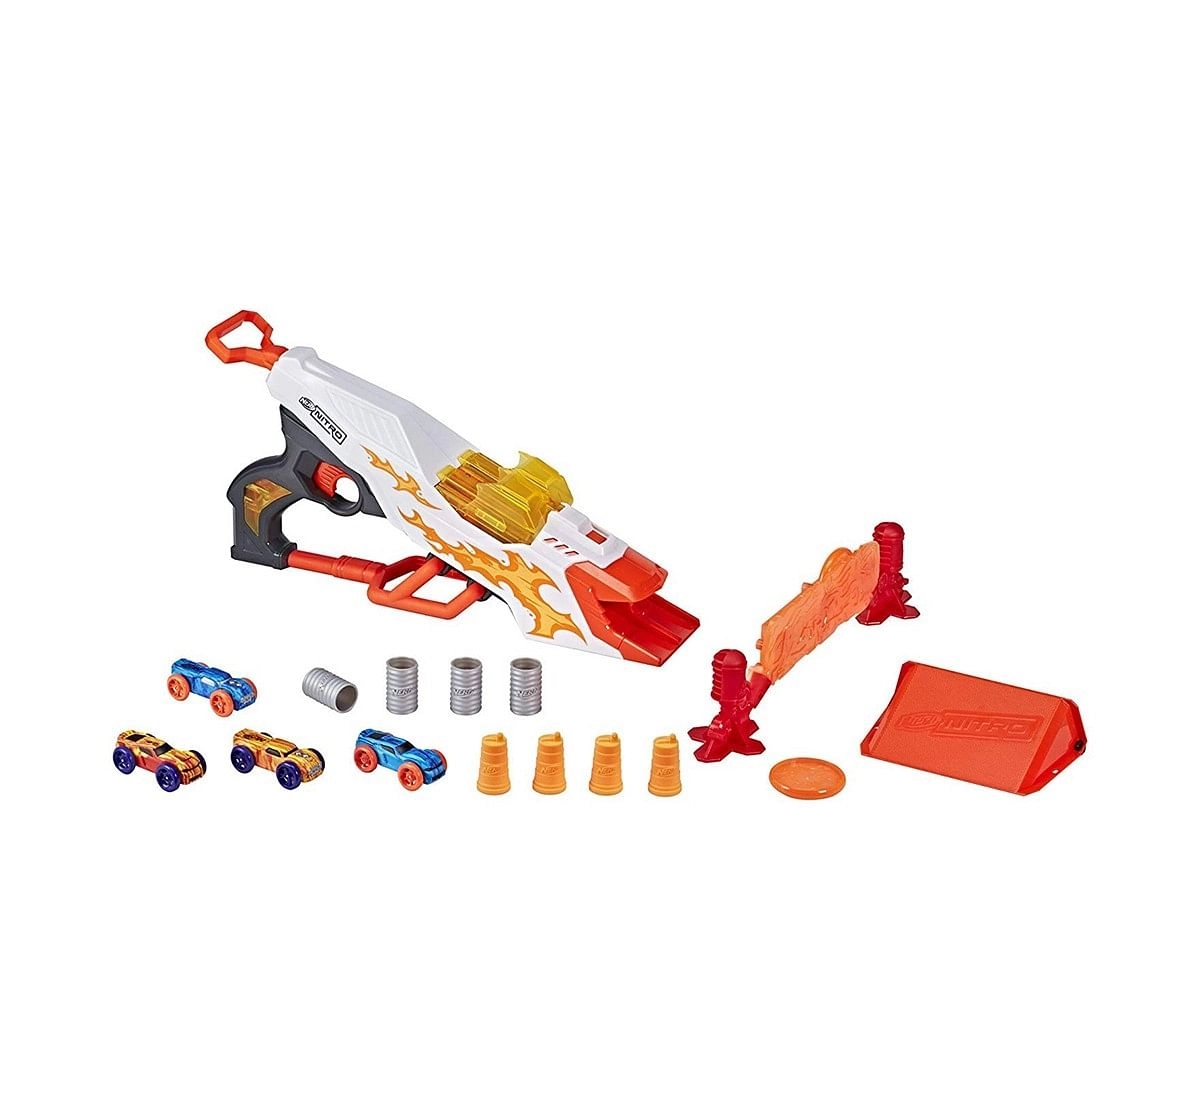 Nerf Doubleclutch Inferno Nitro Toy Includes Blaster, age 4Y+ 